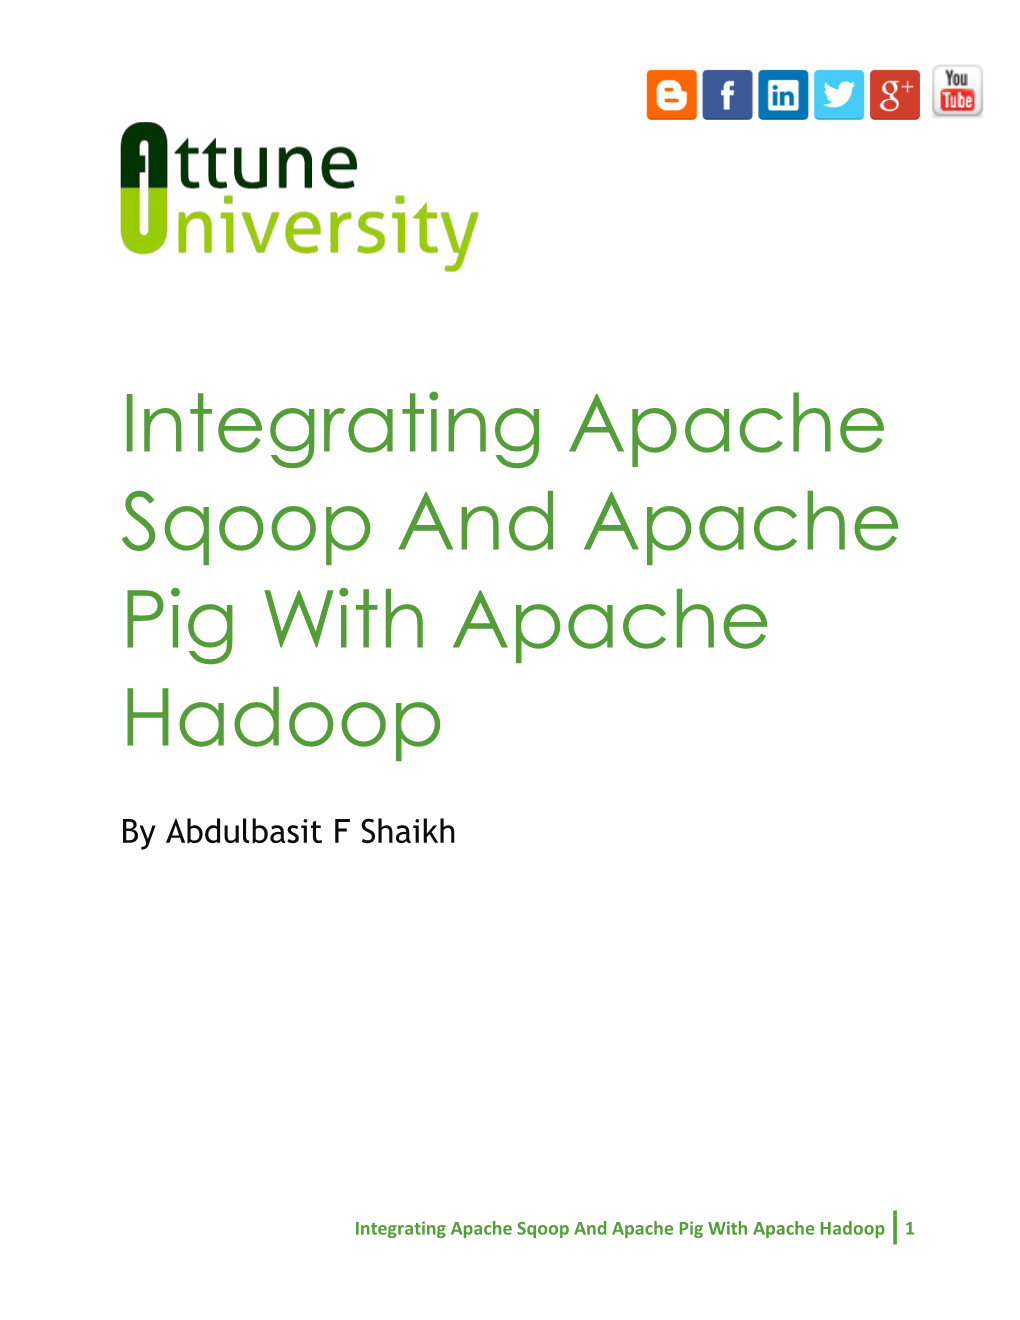 Integrating Apache Sqoop and Apache Pig with Apache Hadoop